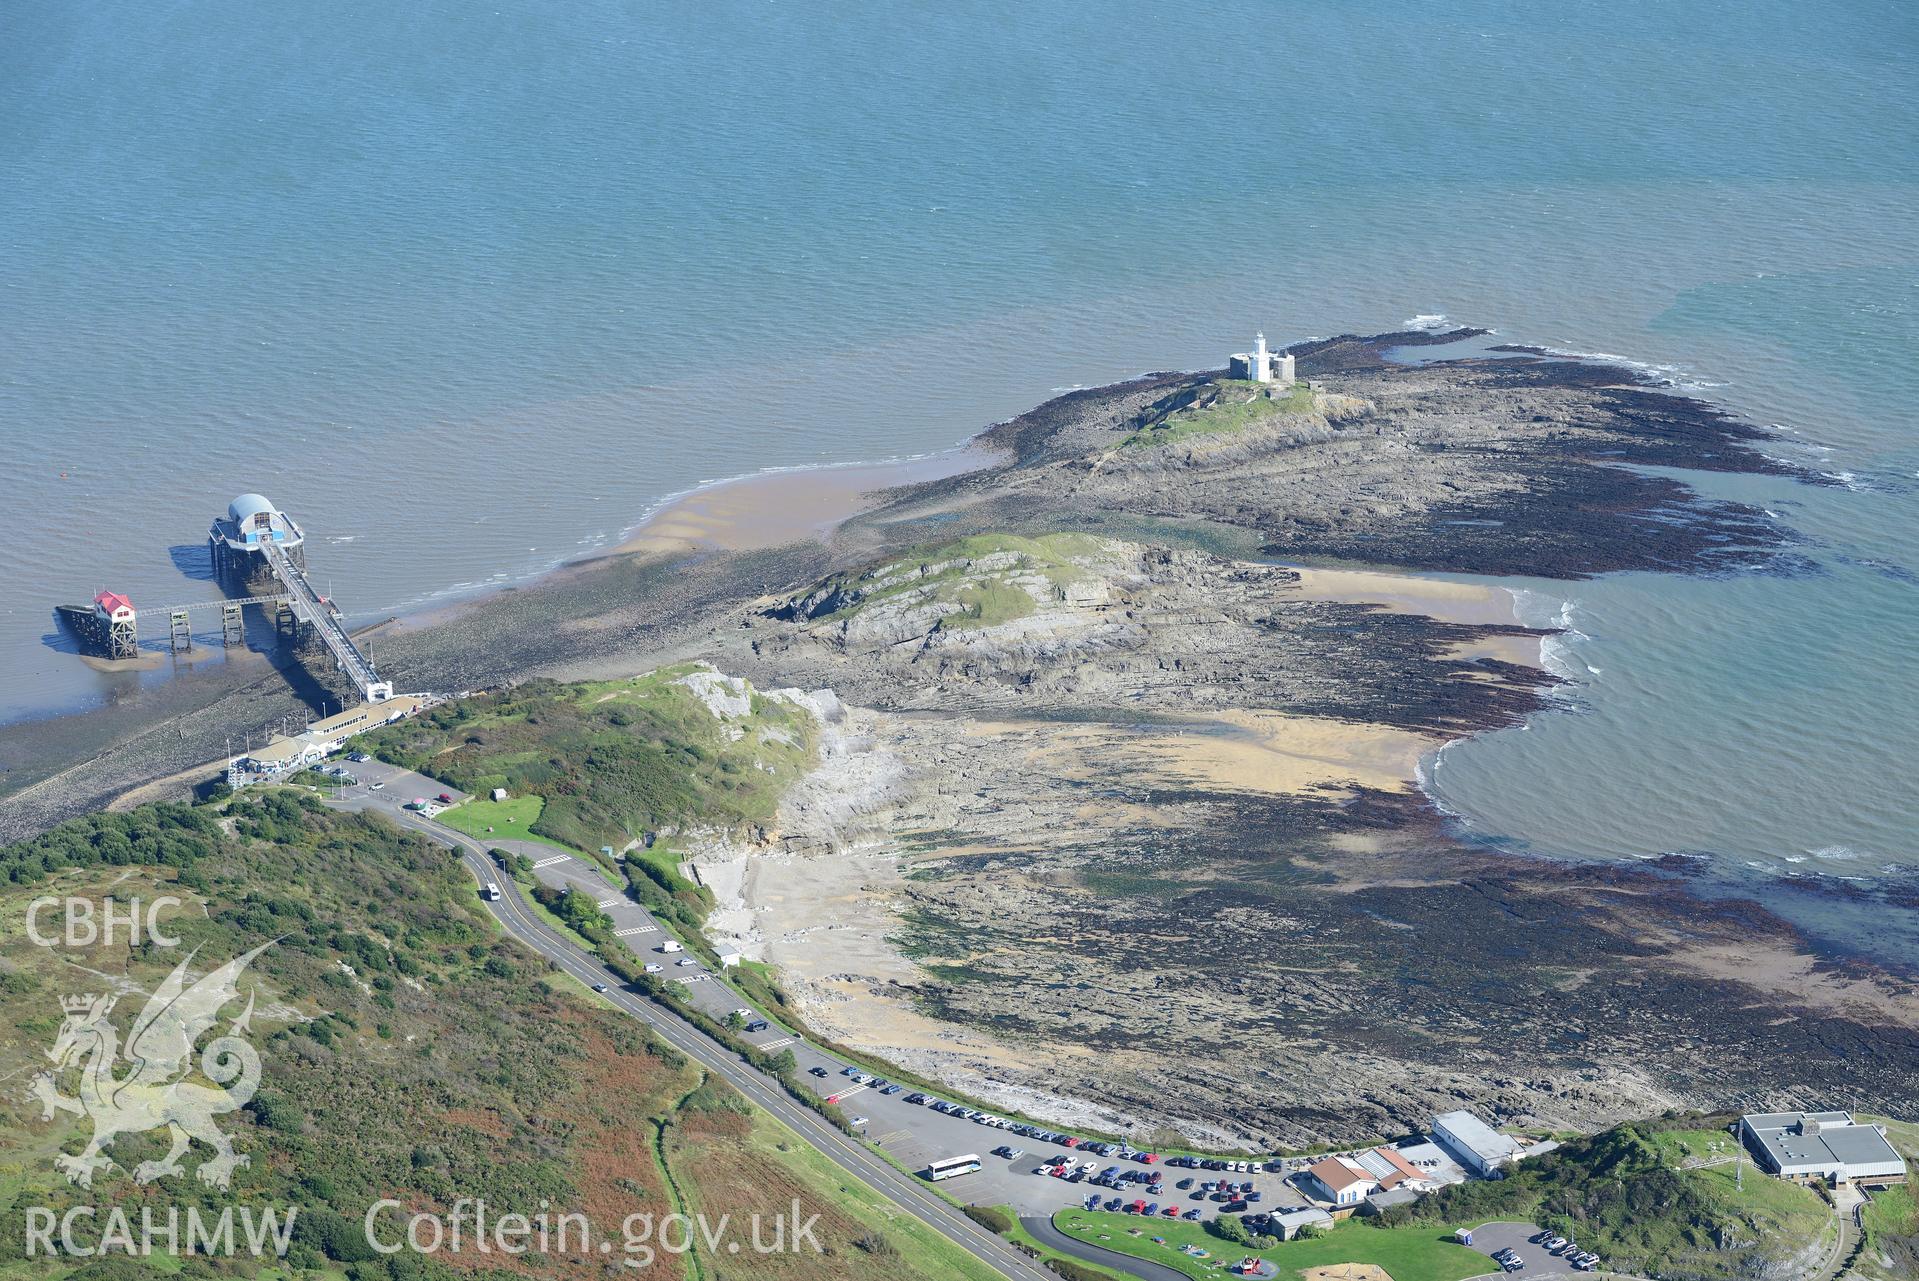 Mumbles fort, pier, coastguard station and lighthouse at the south western edge of Swansea Bay. Oblique aerial photograph taken during the Royal Commission's programme of archaeological aerial reconnaissance by Toby Driver on 30th September 2015.